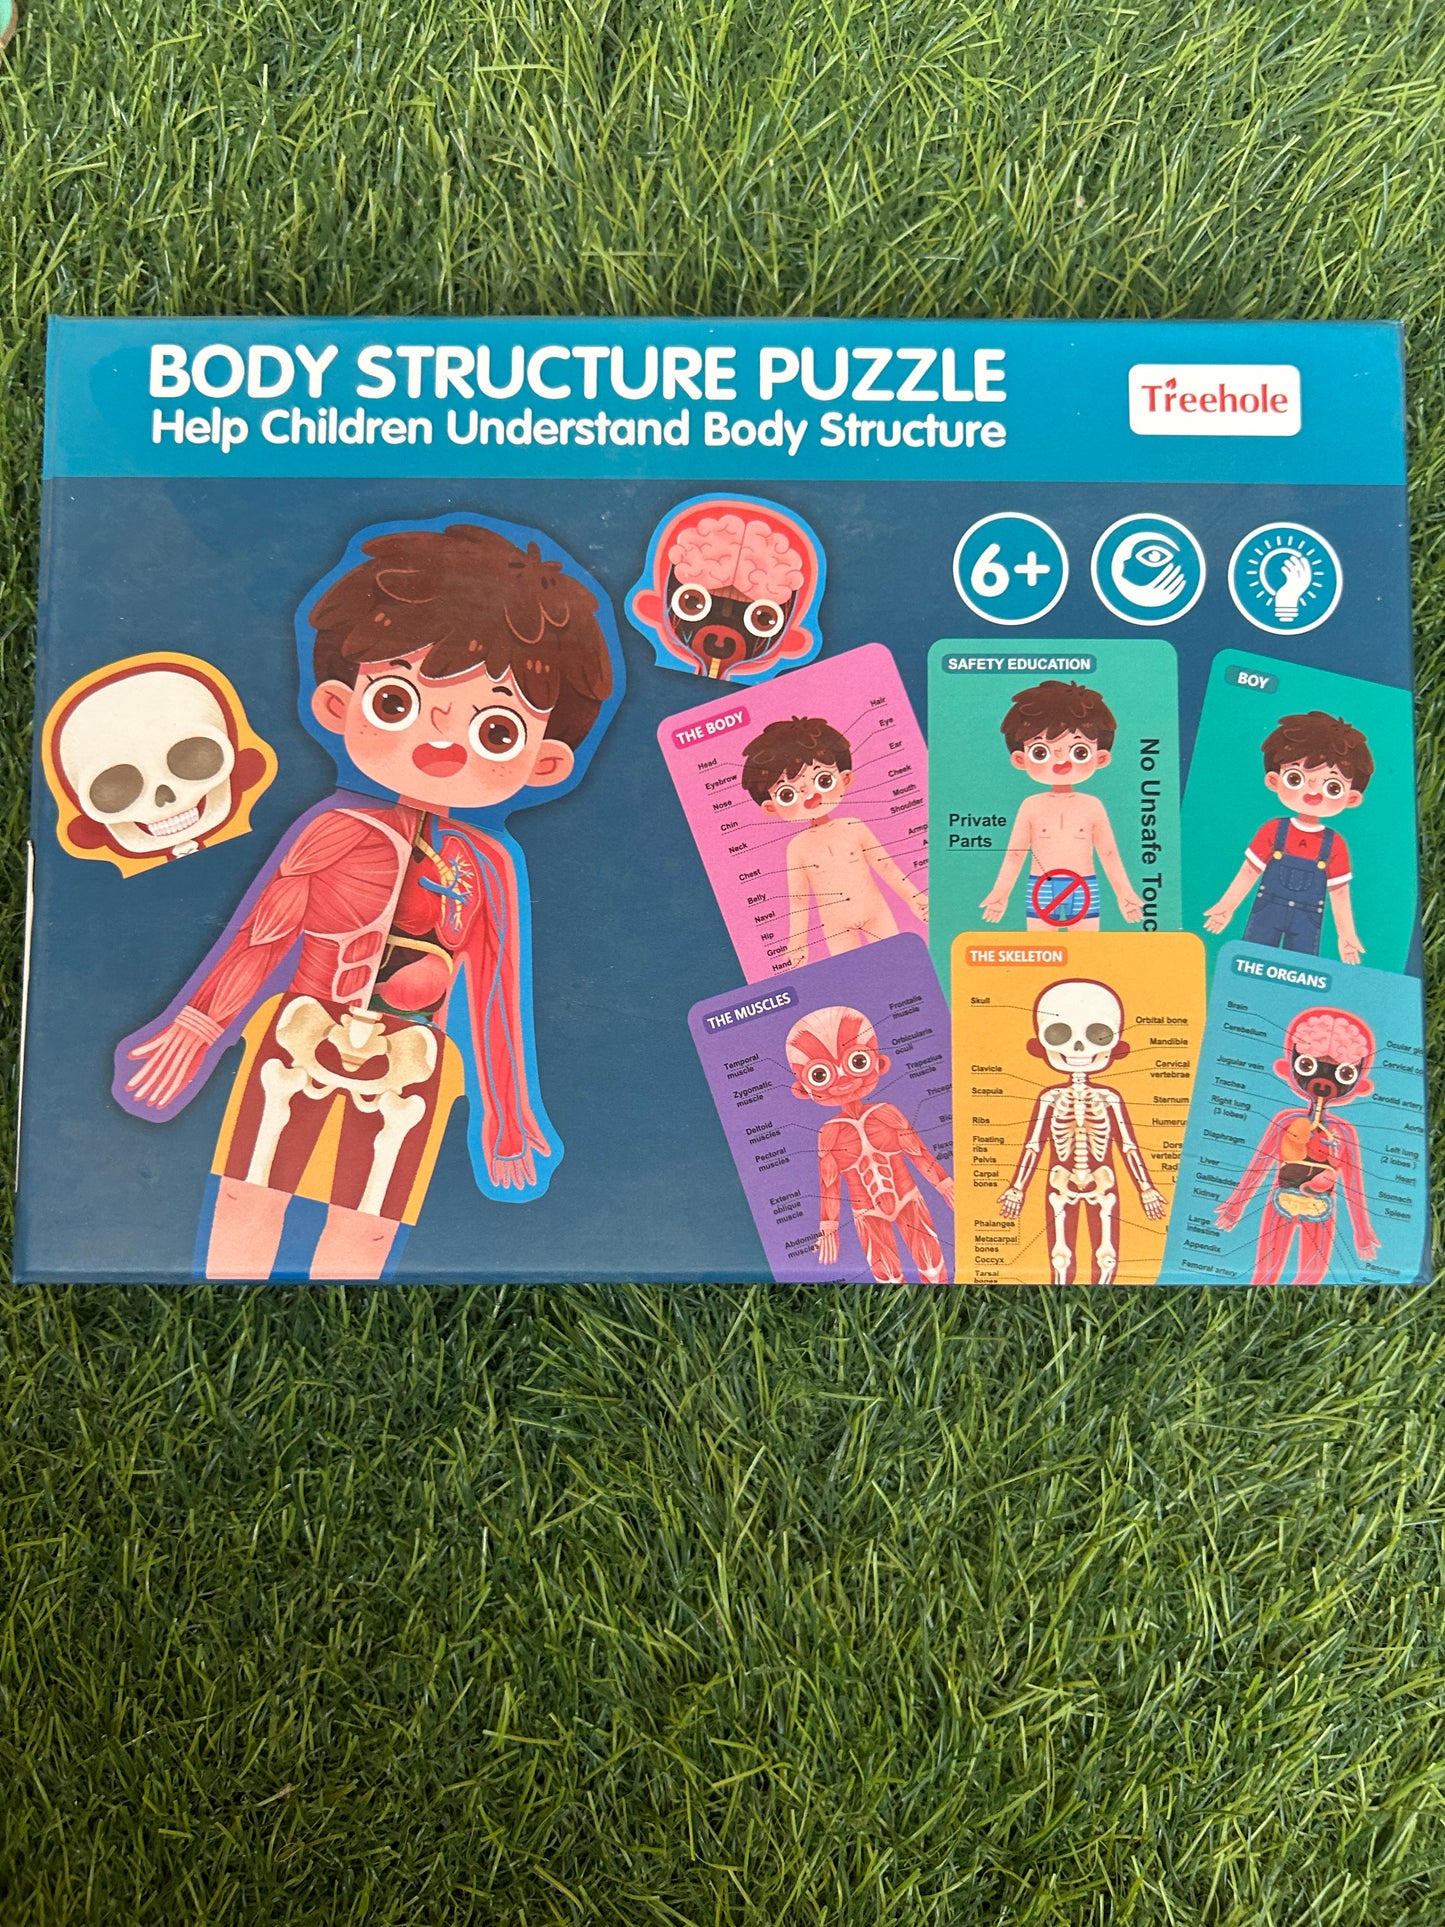 Body structure puzzle